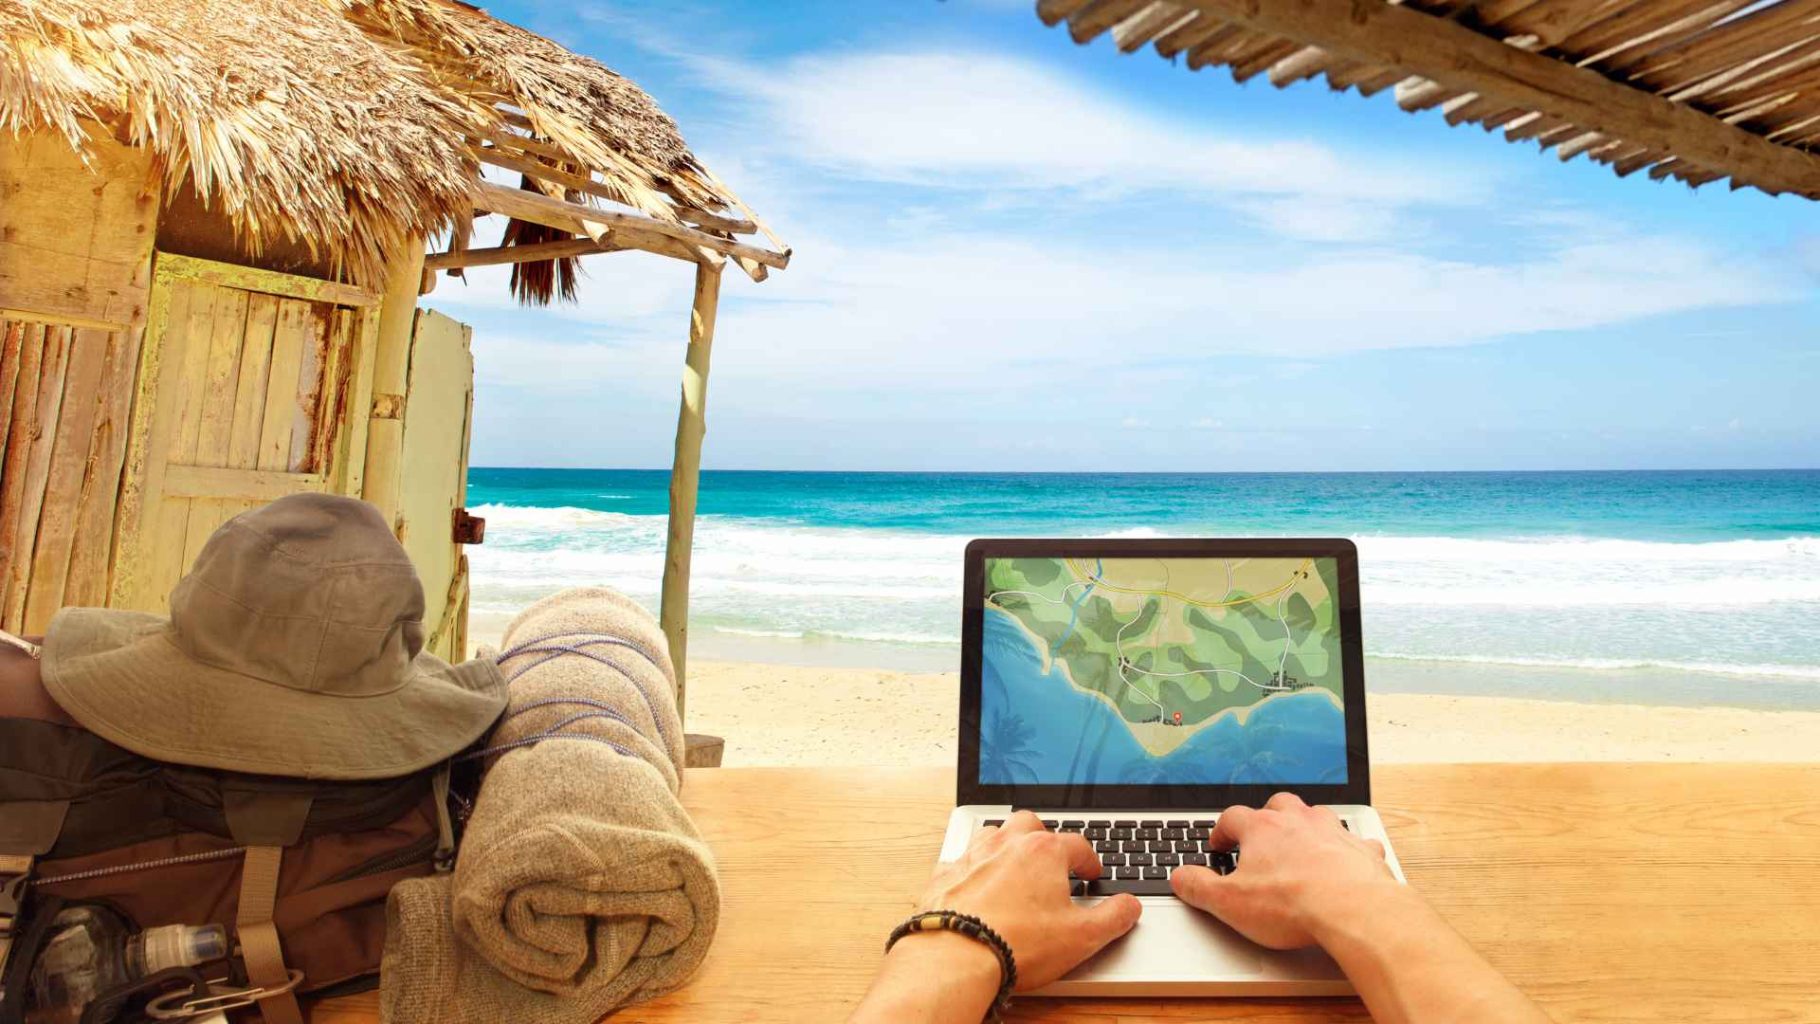 How to Become a Digital Nomad: Pros, Cons, and Jobs